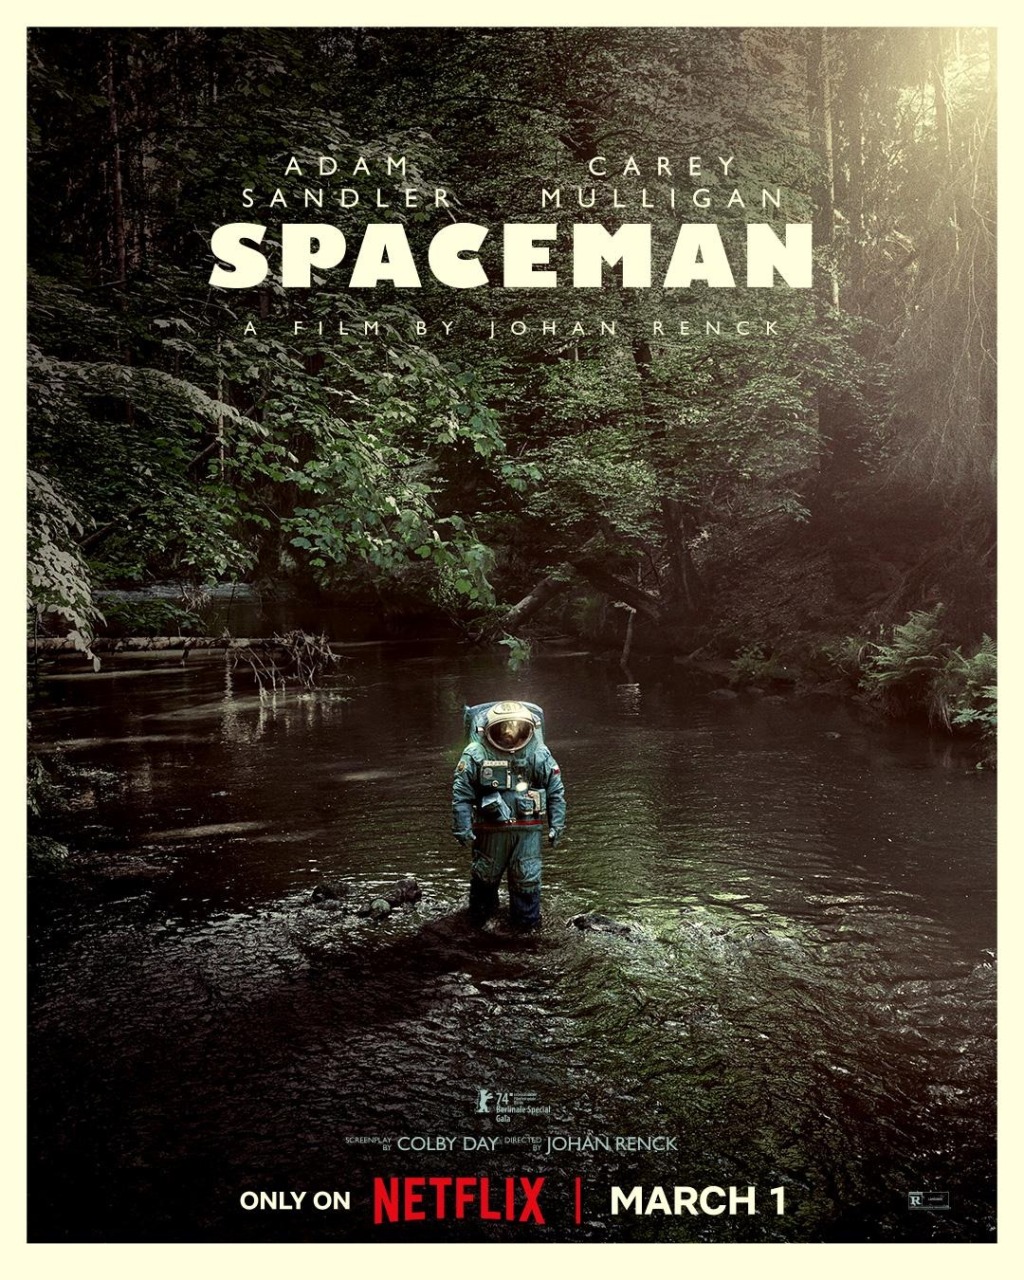 Spaceman Review — Adam Sandler is reflective in outer space